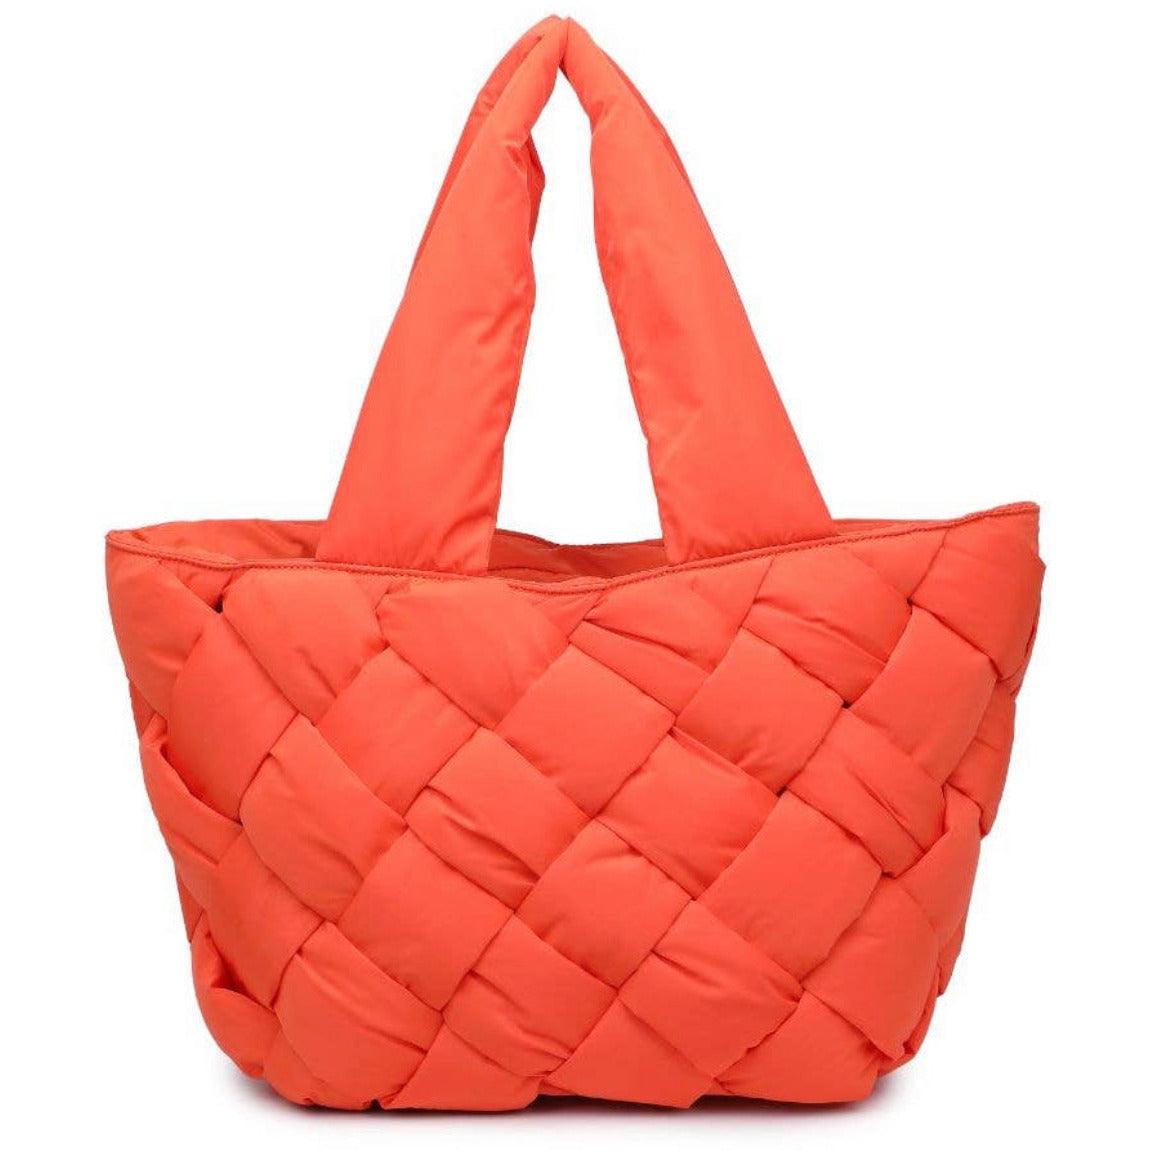 Women's Intuition East West Tote | Sole and Selene - becauseofadi